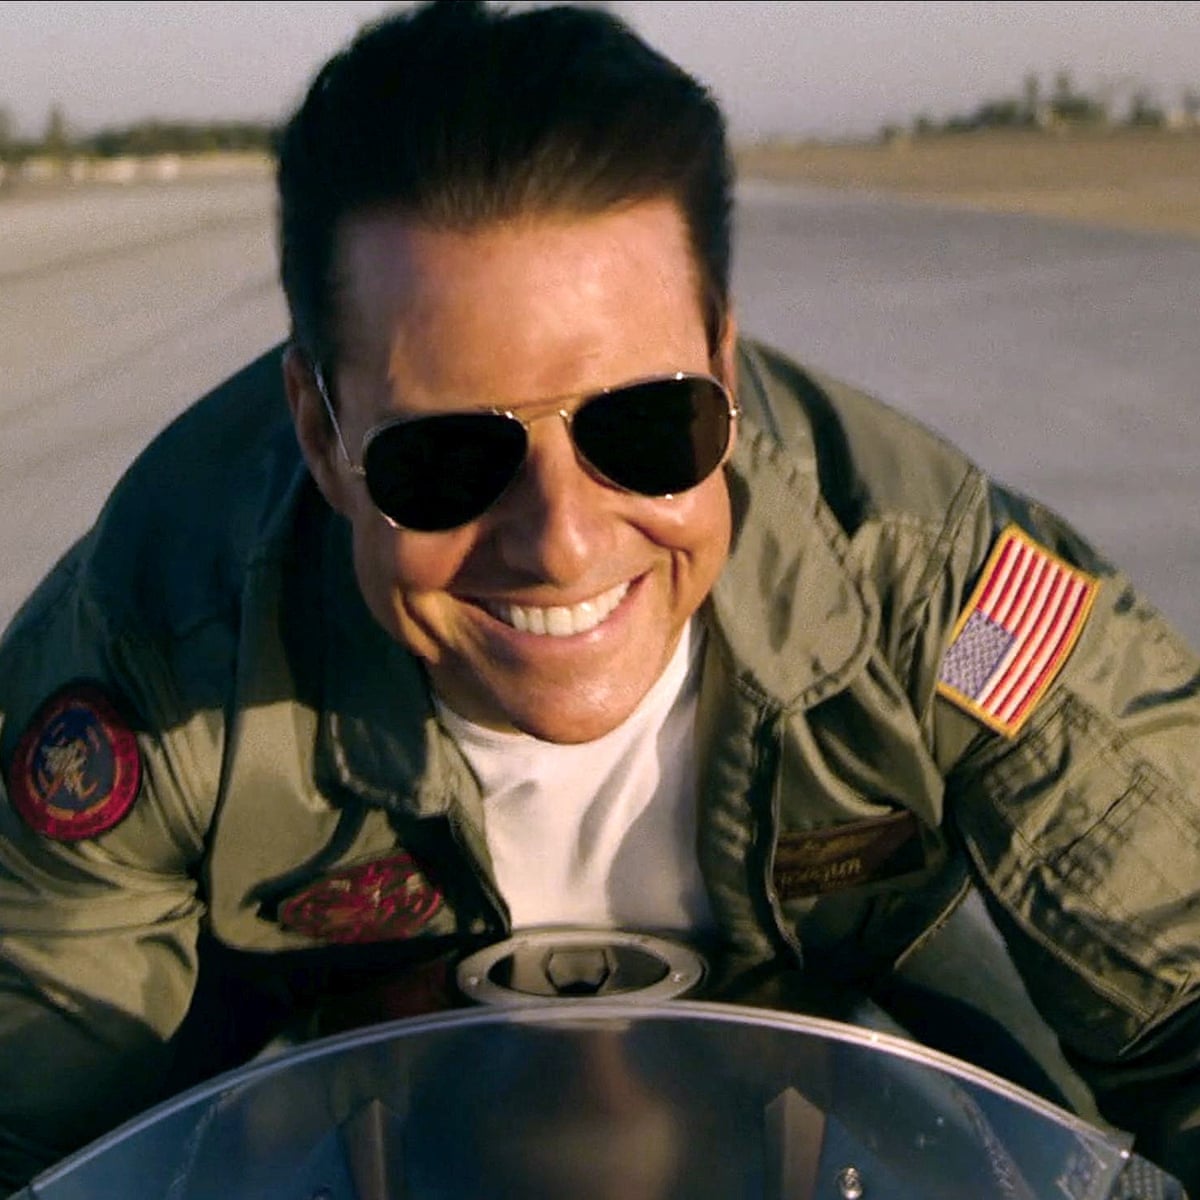 Streaming: Top Gun: Maverick and the best of Tom Cruise, Action and  adventure films